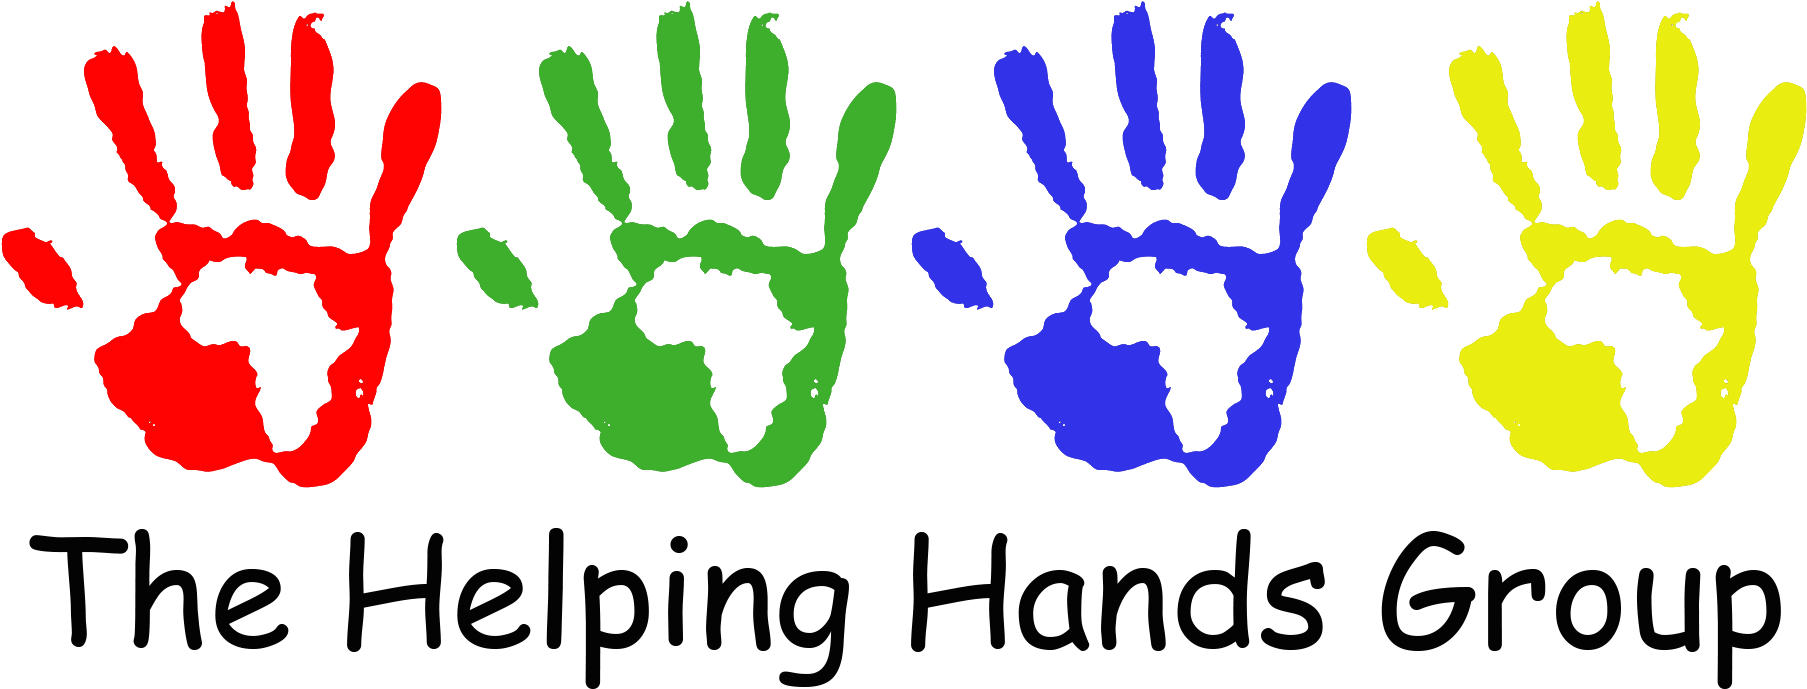 Primary Colors Africa Png - Helping Hands Group (1950x750), Png Download